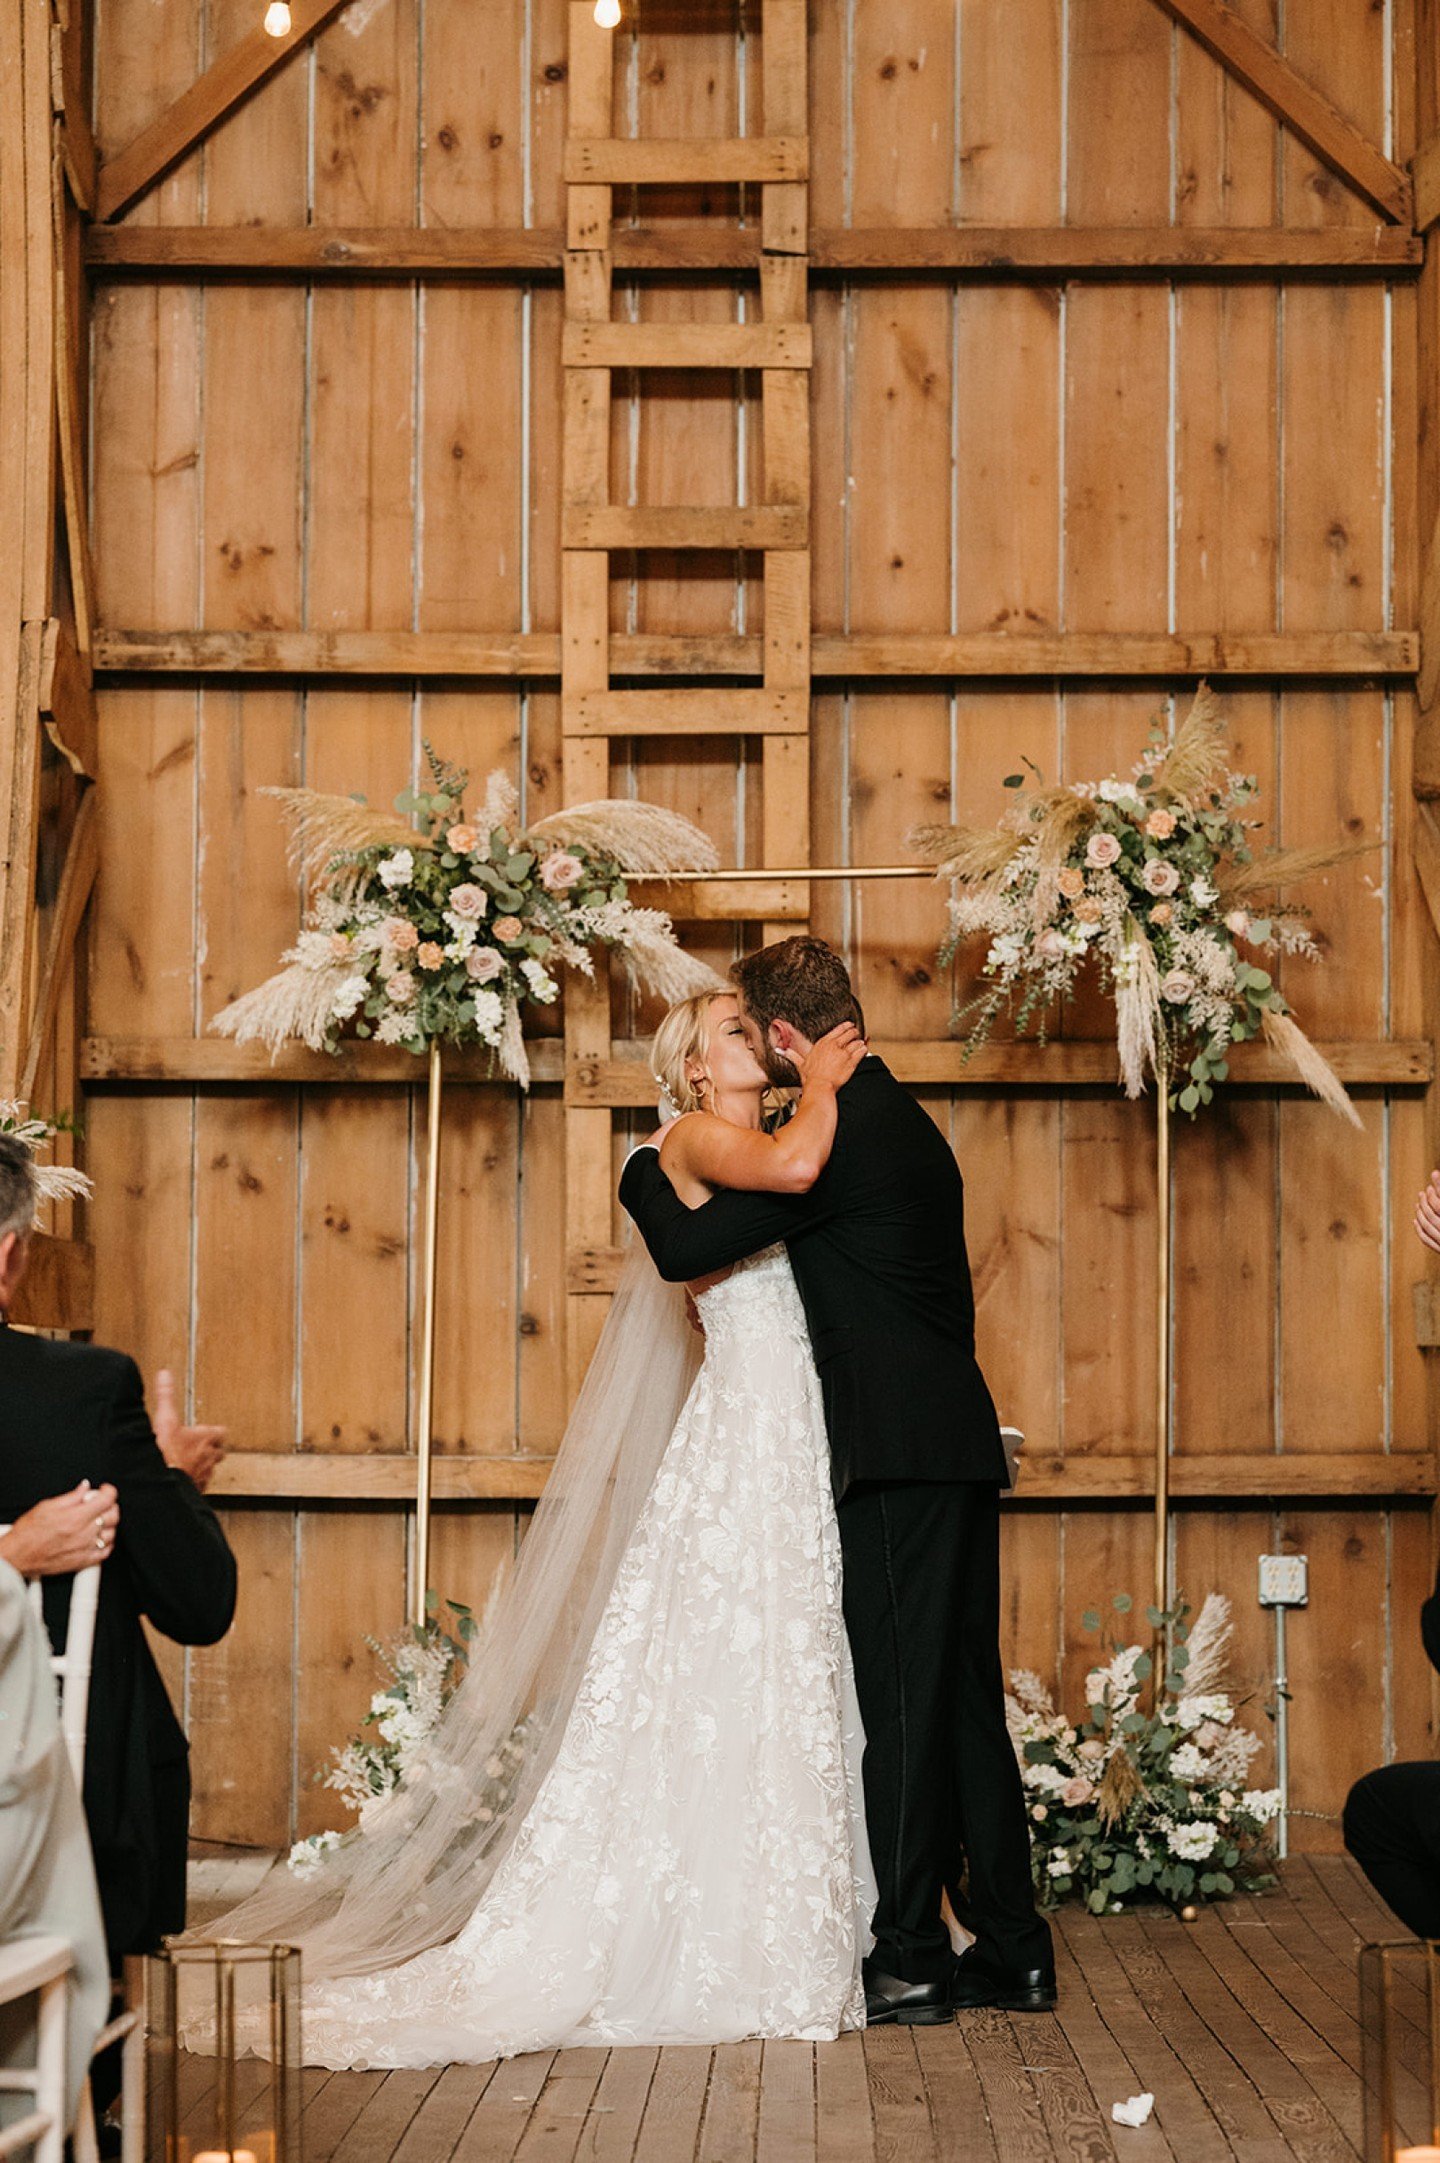 Welcome to our hundred-year-old white dairy barn, where you can take in the beauty of the natural wood, soaring 30-foot ceilings and crystal chandeliers--an ideal backdrop for your indoor ceremony. 🤍

Visit our website and start planning your magica